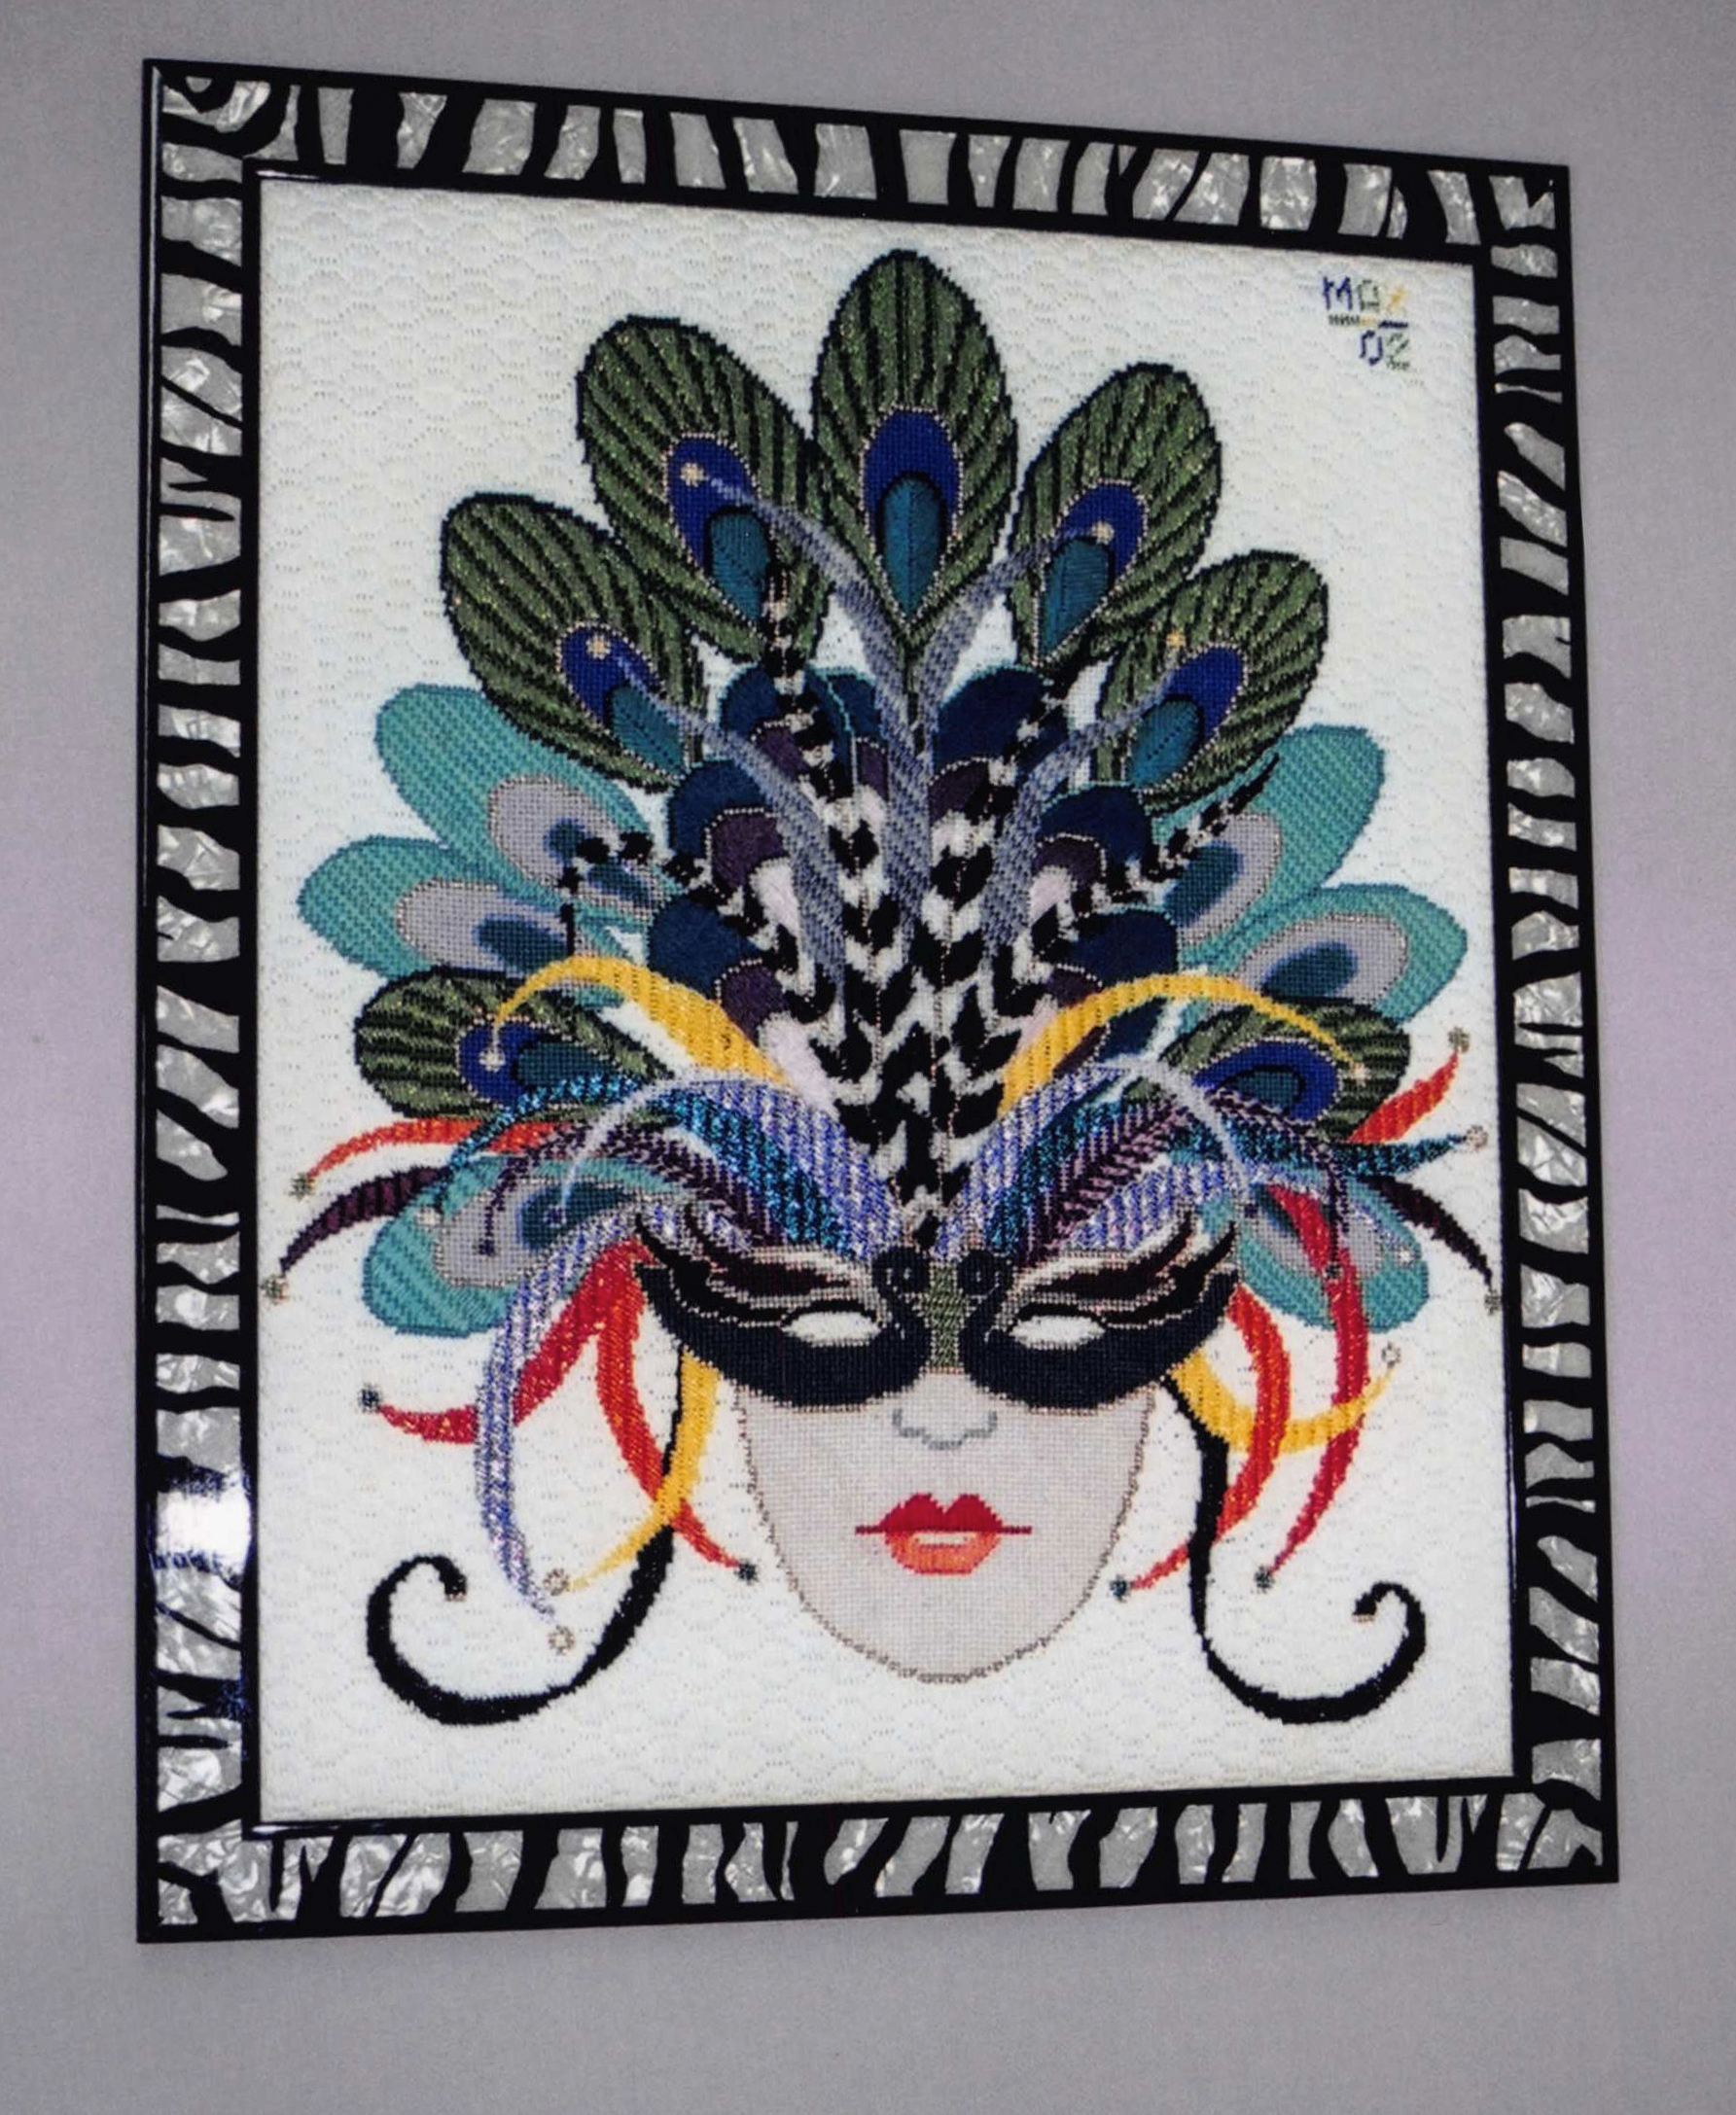 Framed needlepoint mask with peacock feathers and zebra stripes and zebra striped frame